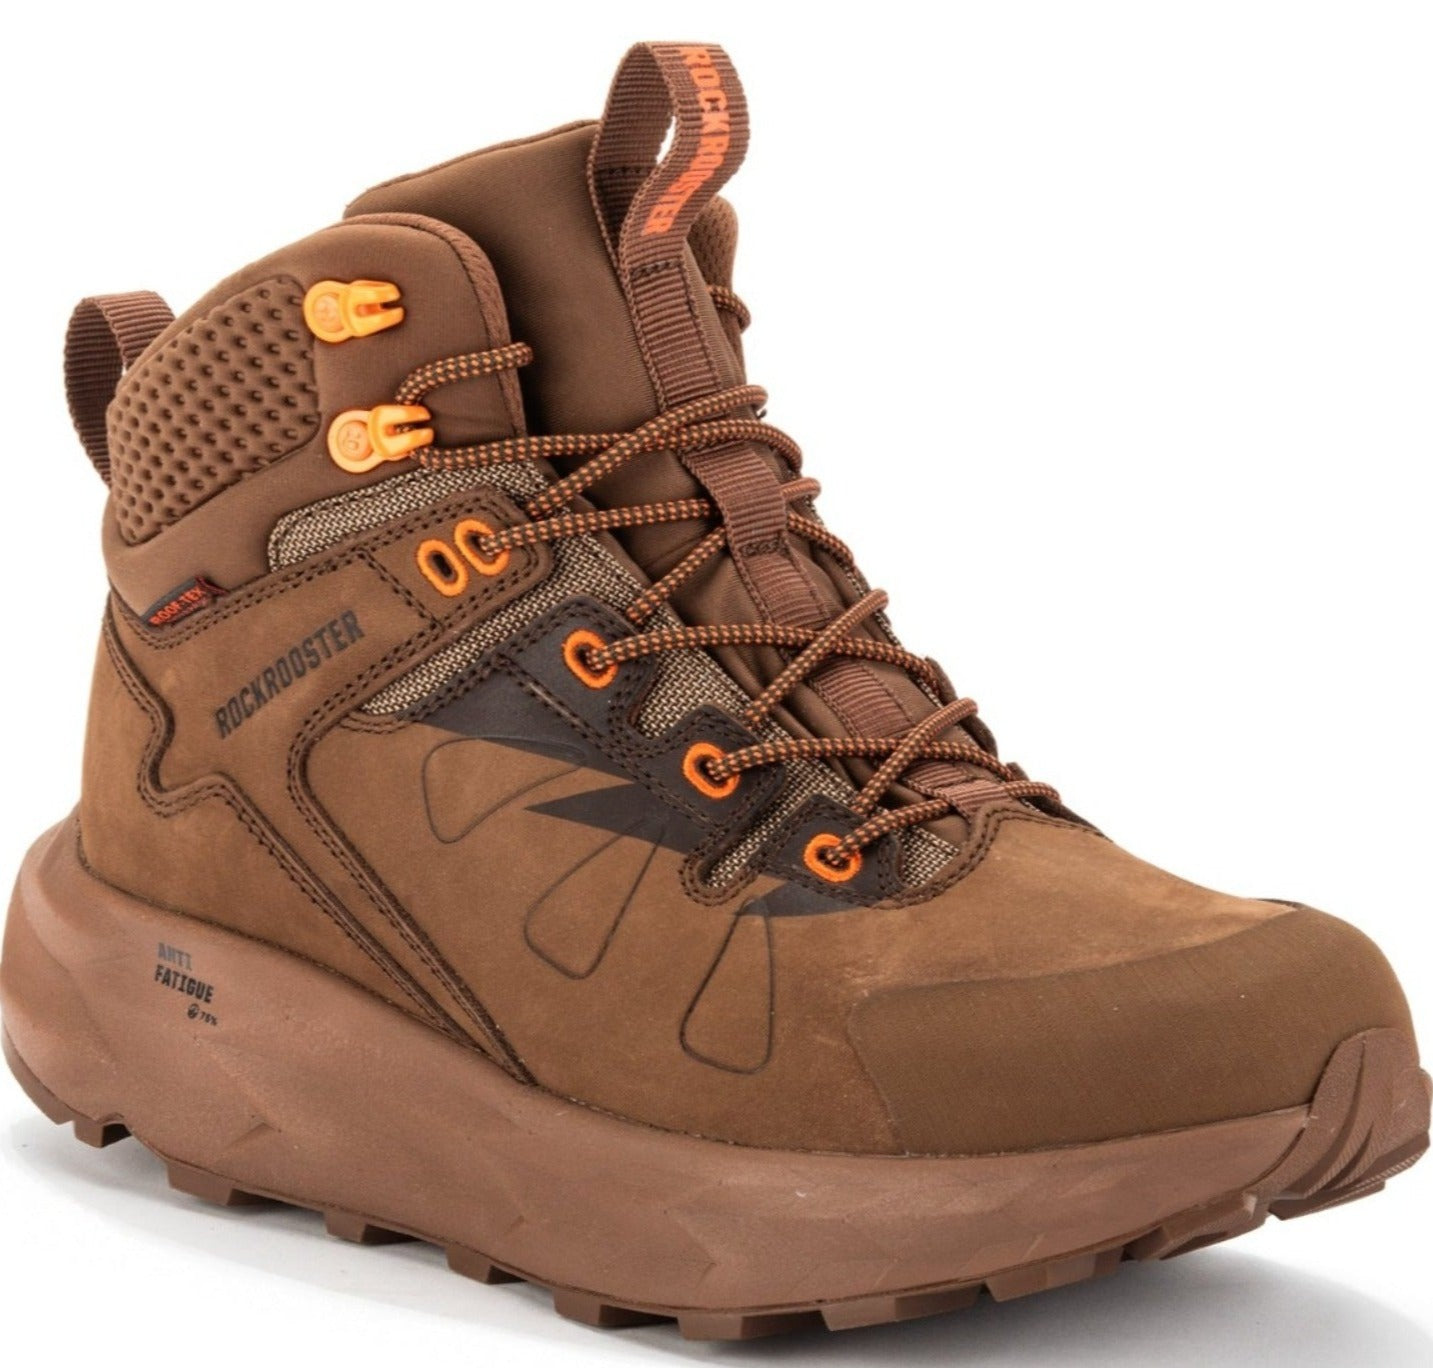 ROCKROOSTER Farmington Brown 6 inch Waterproof Hiking Boots with Vibram Outsole OC21031 - US 08 / Normal